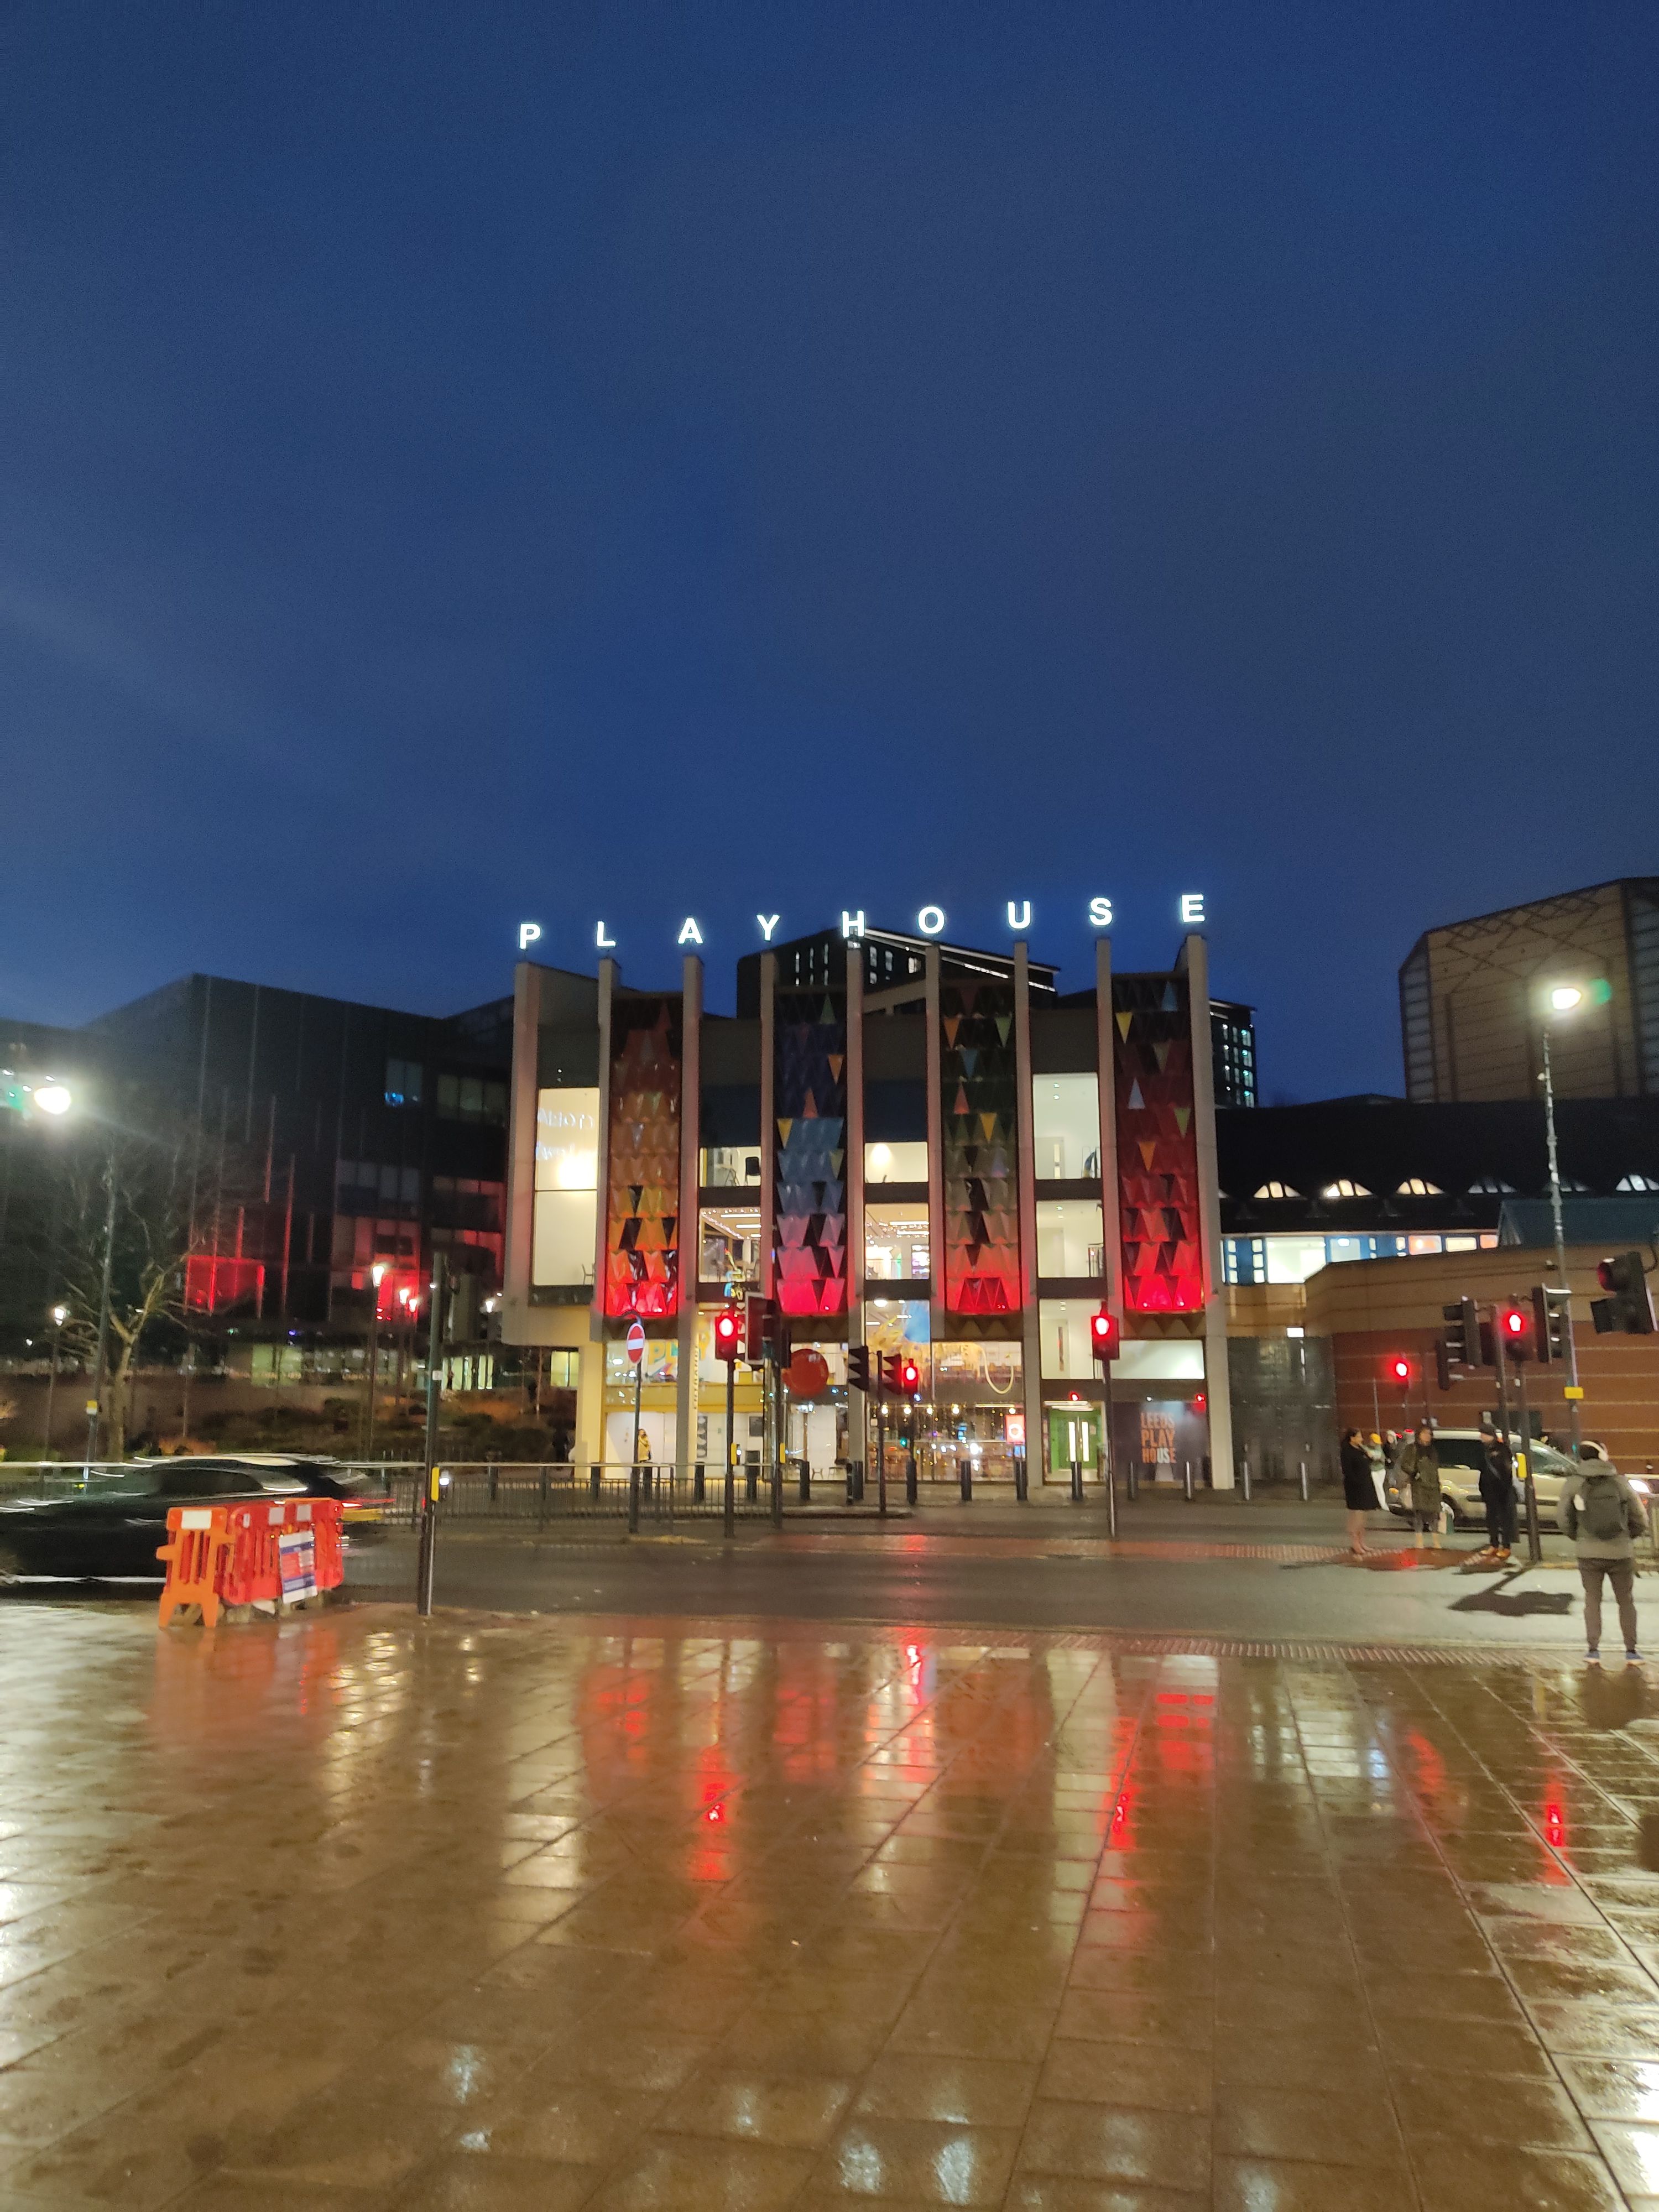 Leeds Playhouse, the conference venue, at night